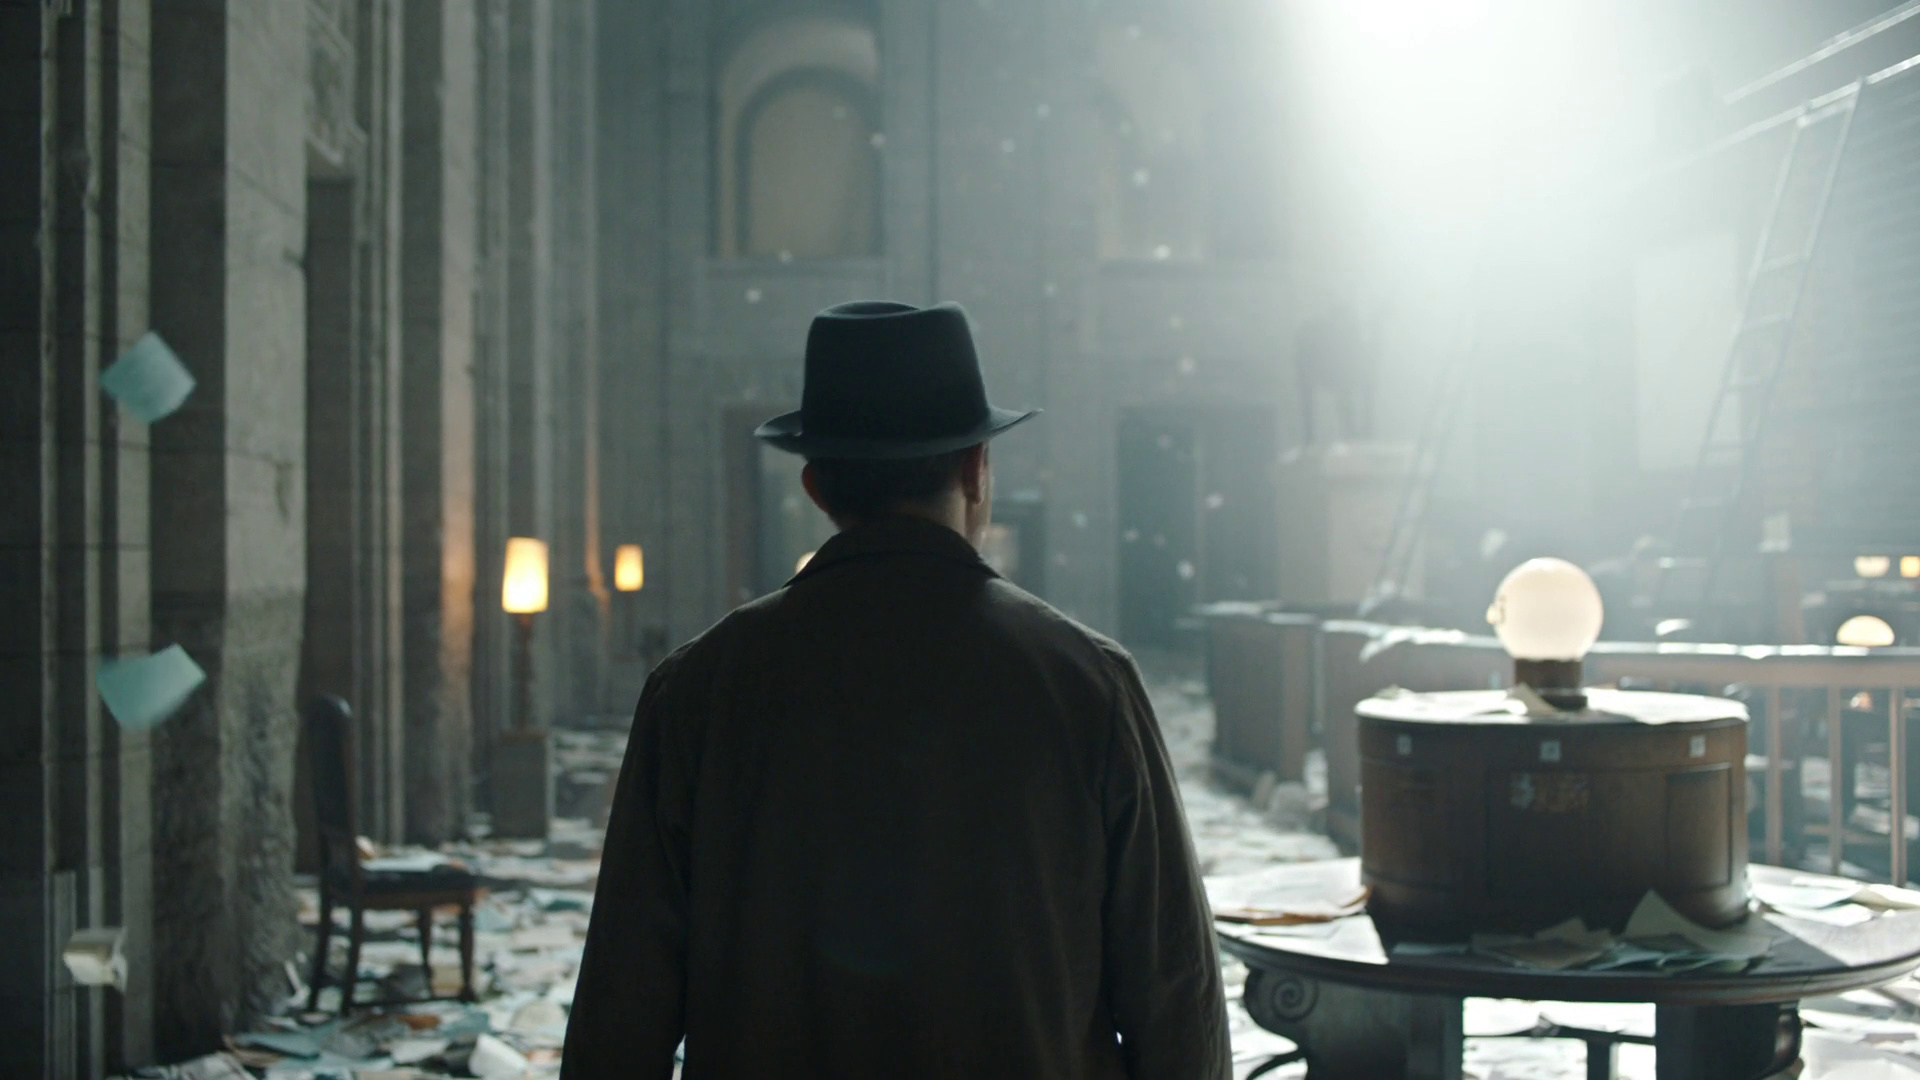 Babylon Berlin, Intriguing city, 1920s Germany, Mysterious characters, 1920x1080 Full HD Desktop